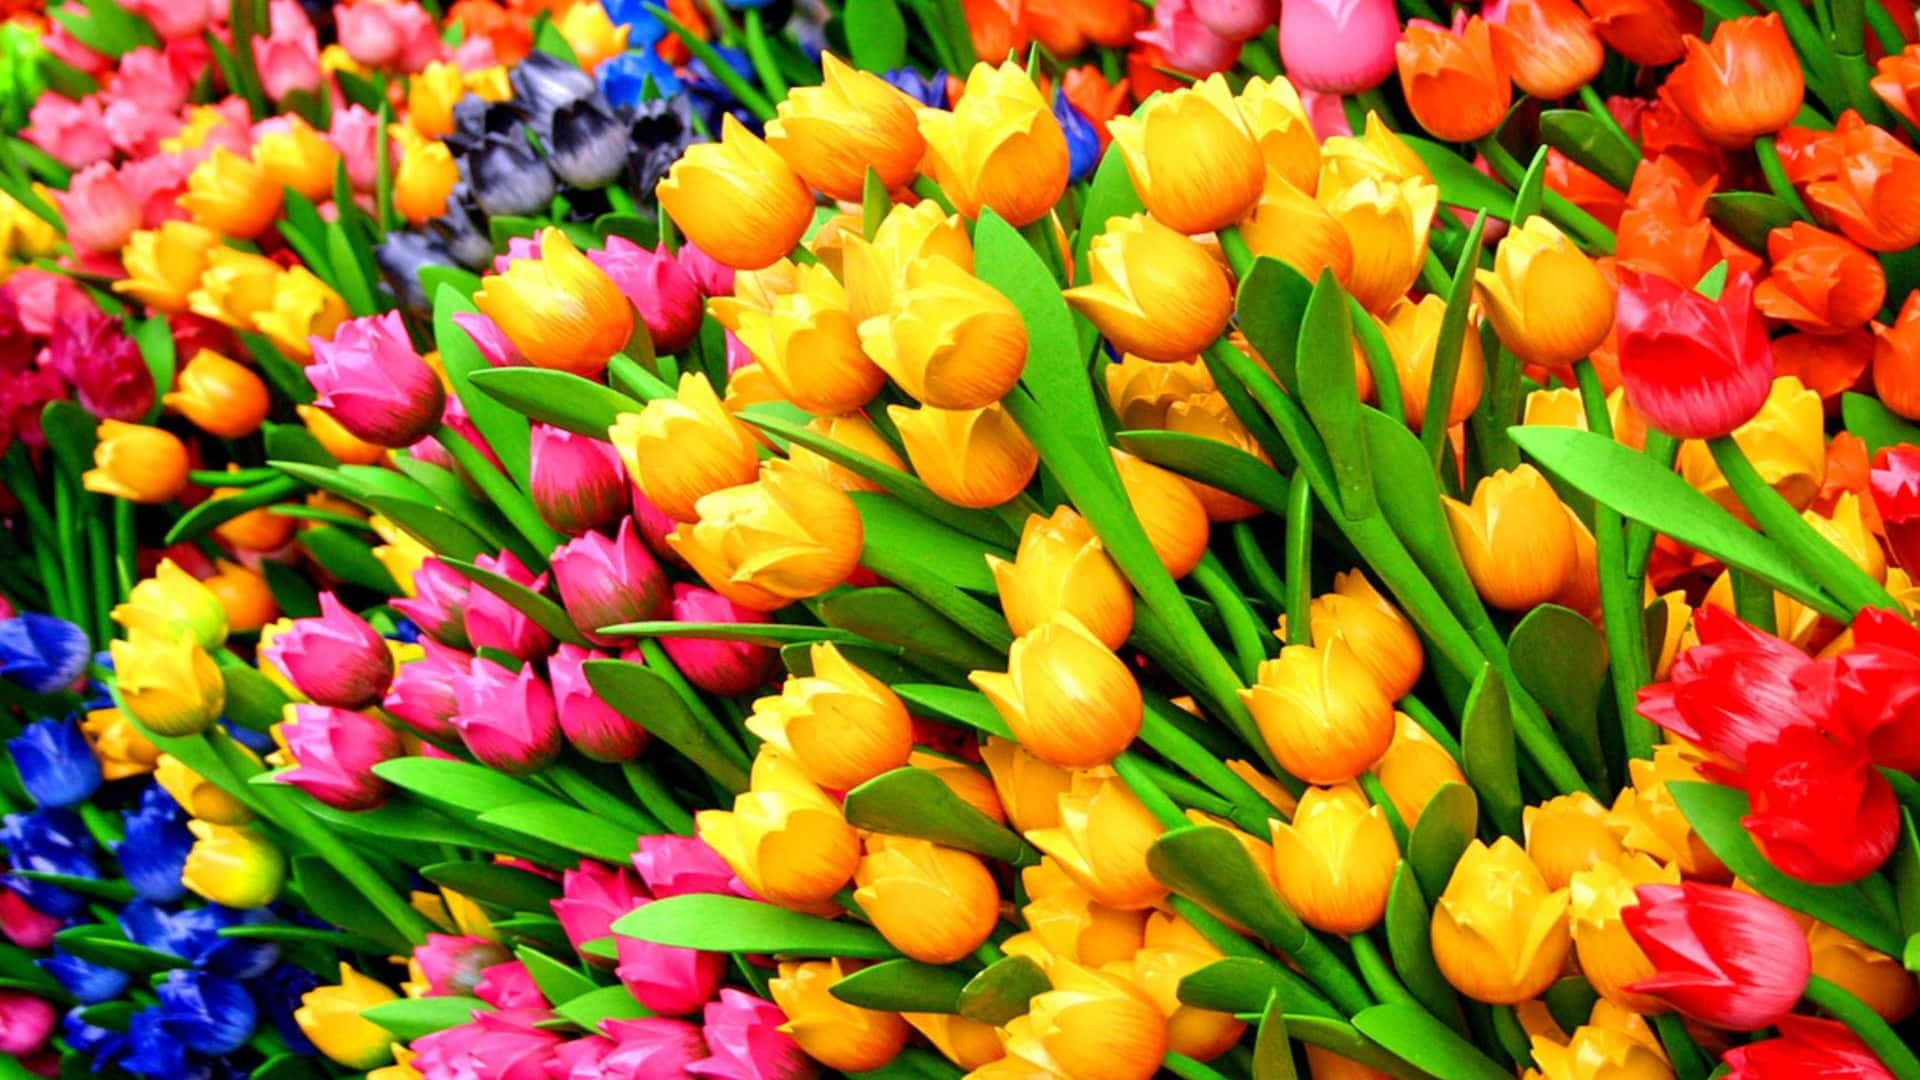 Stunning Colorful Flowers in Full Bloom Wallpaper